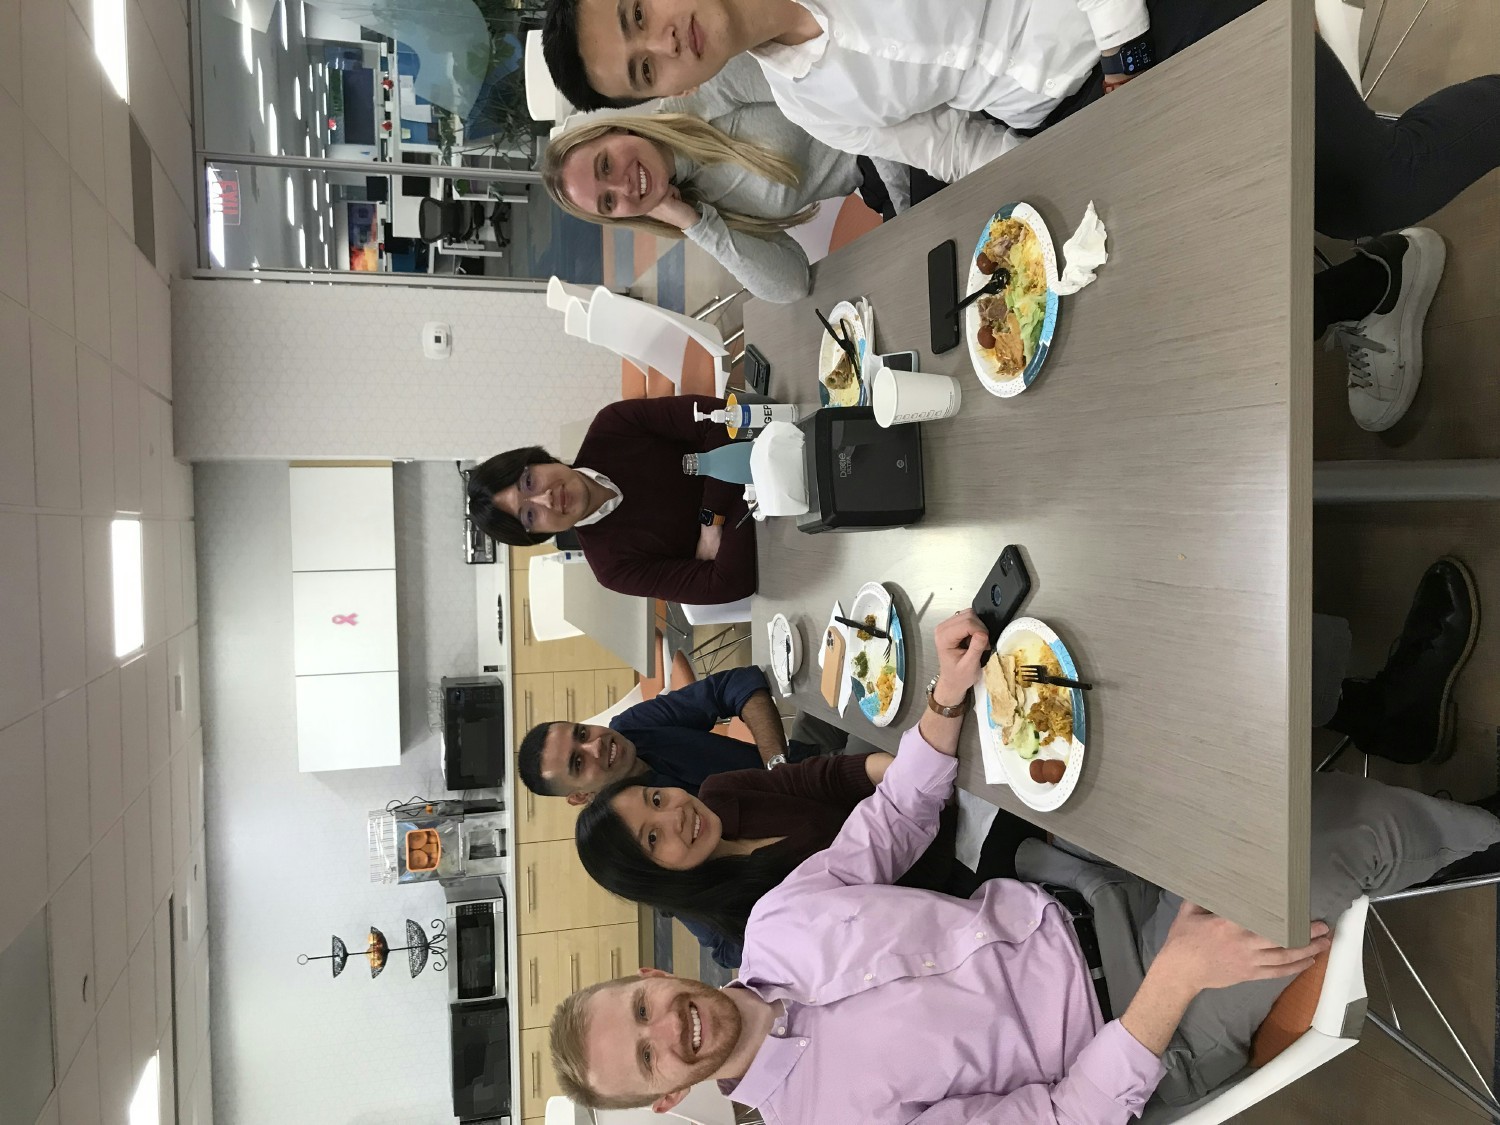 The team in Clark had both a delicious meal to celebrate the Eid al-Fitr, and a lesson on the holiday.